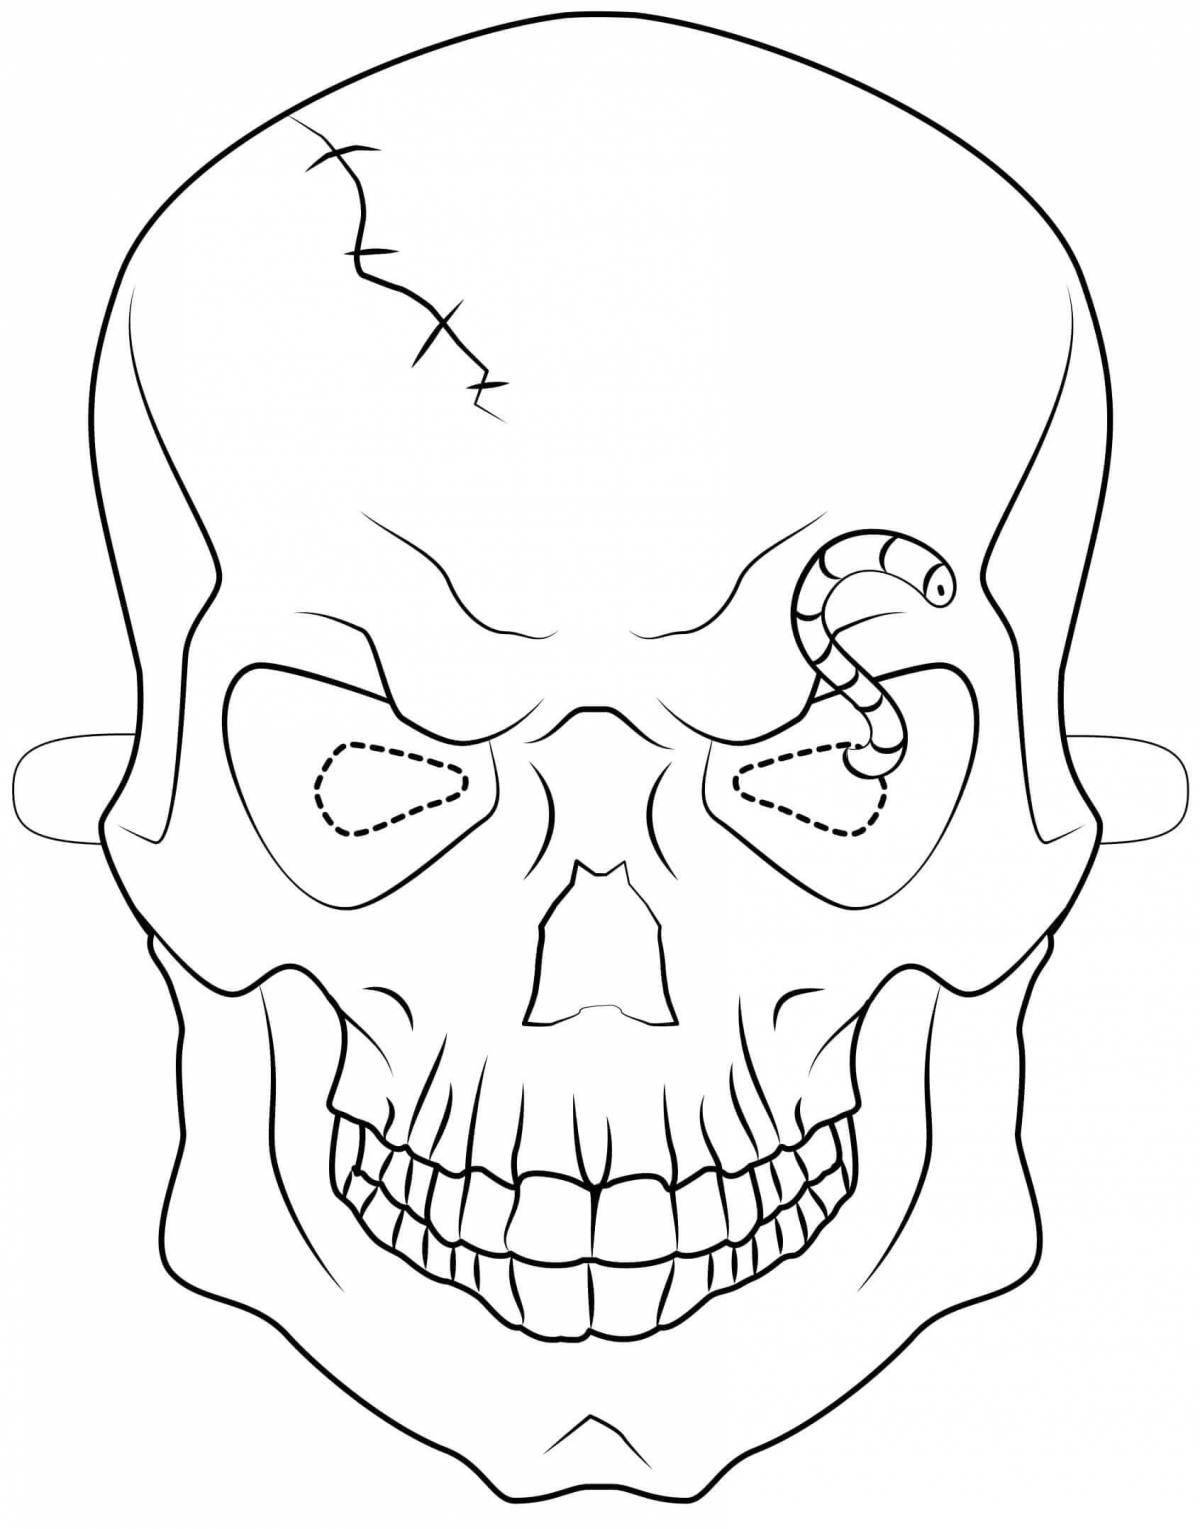 Colorful skull coloring page for kids